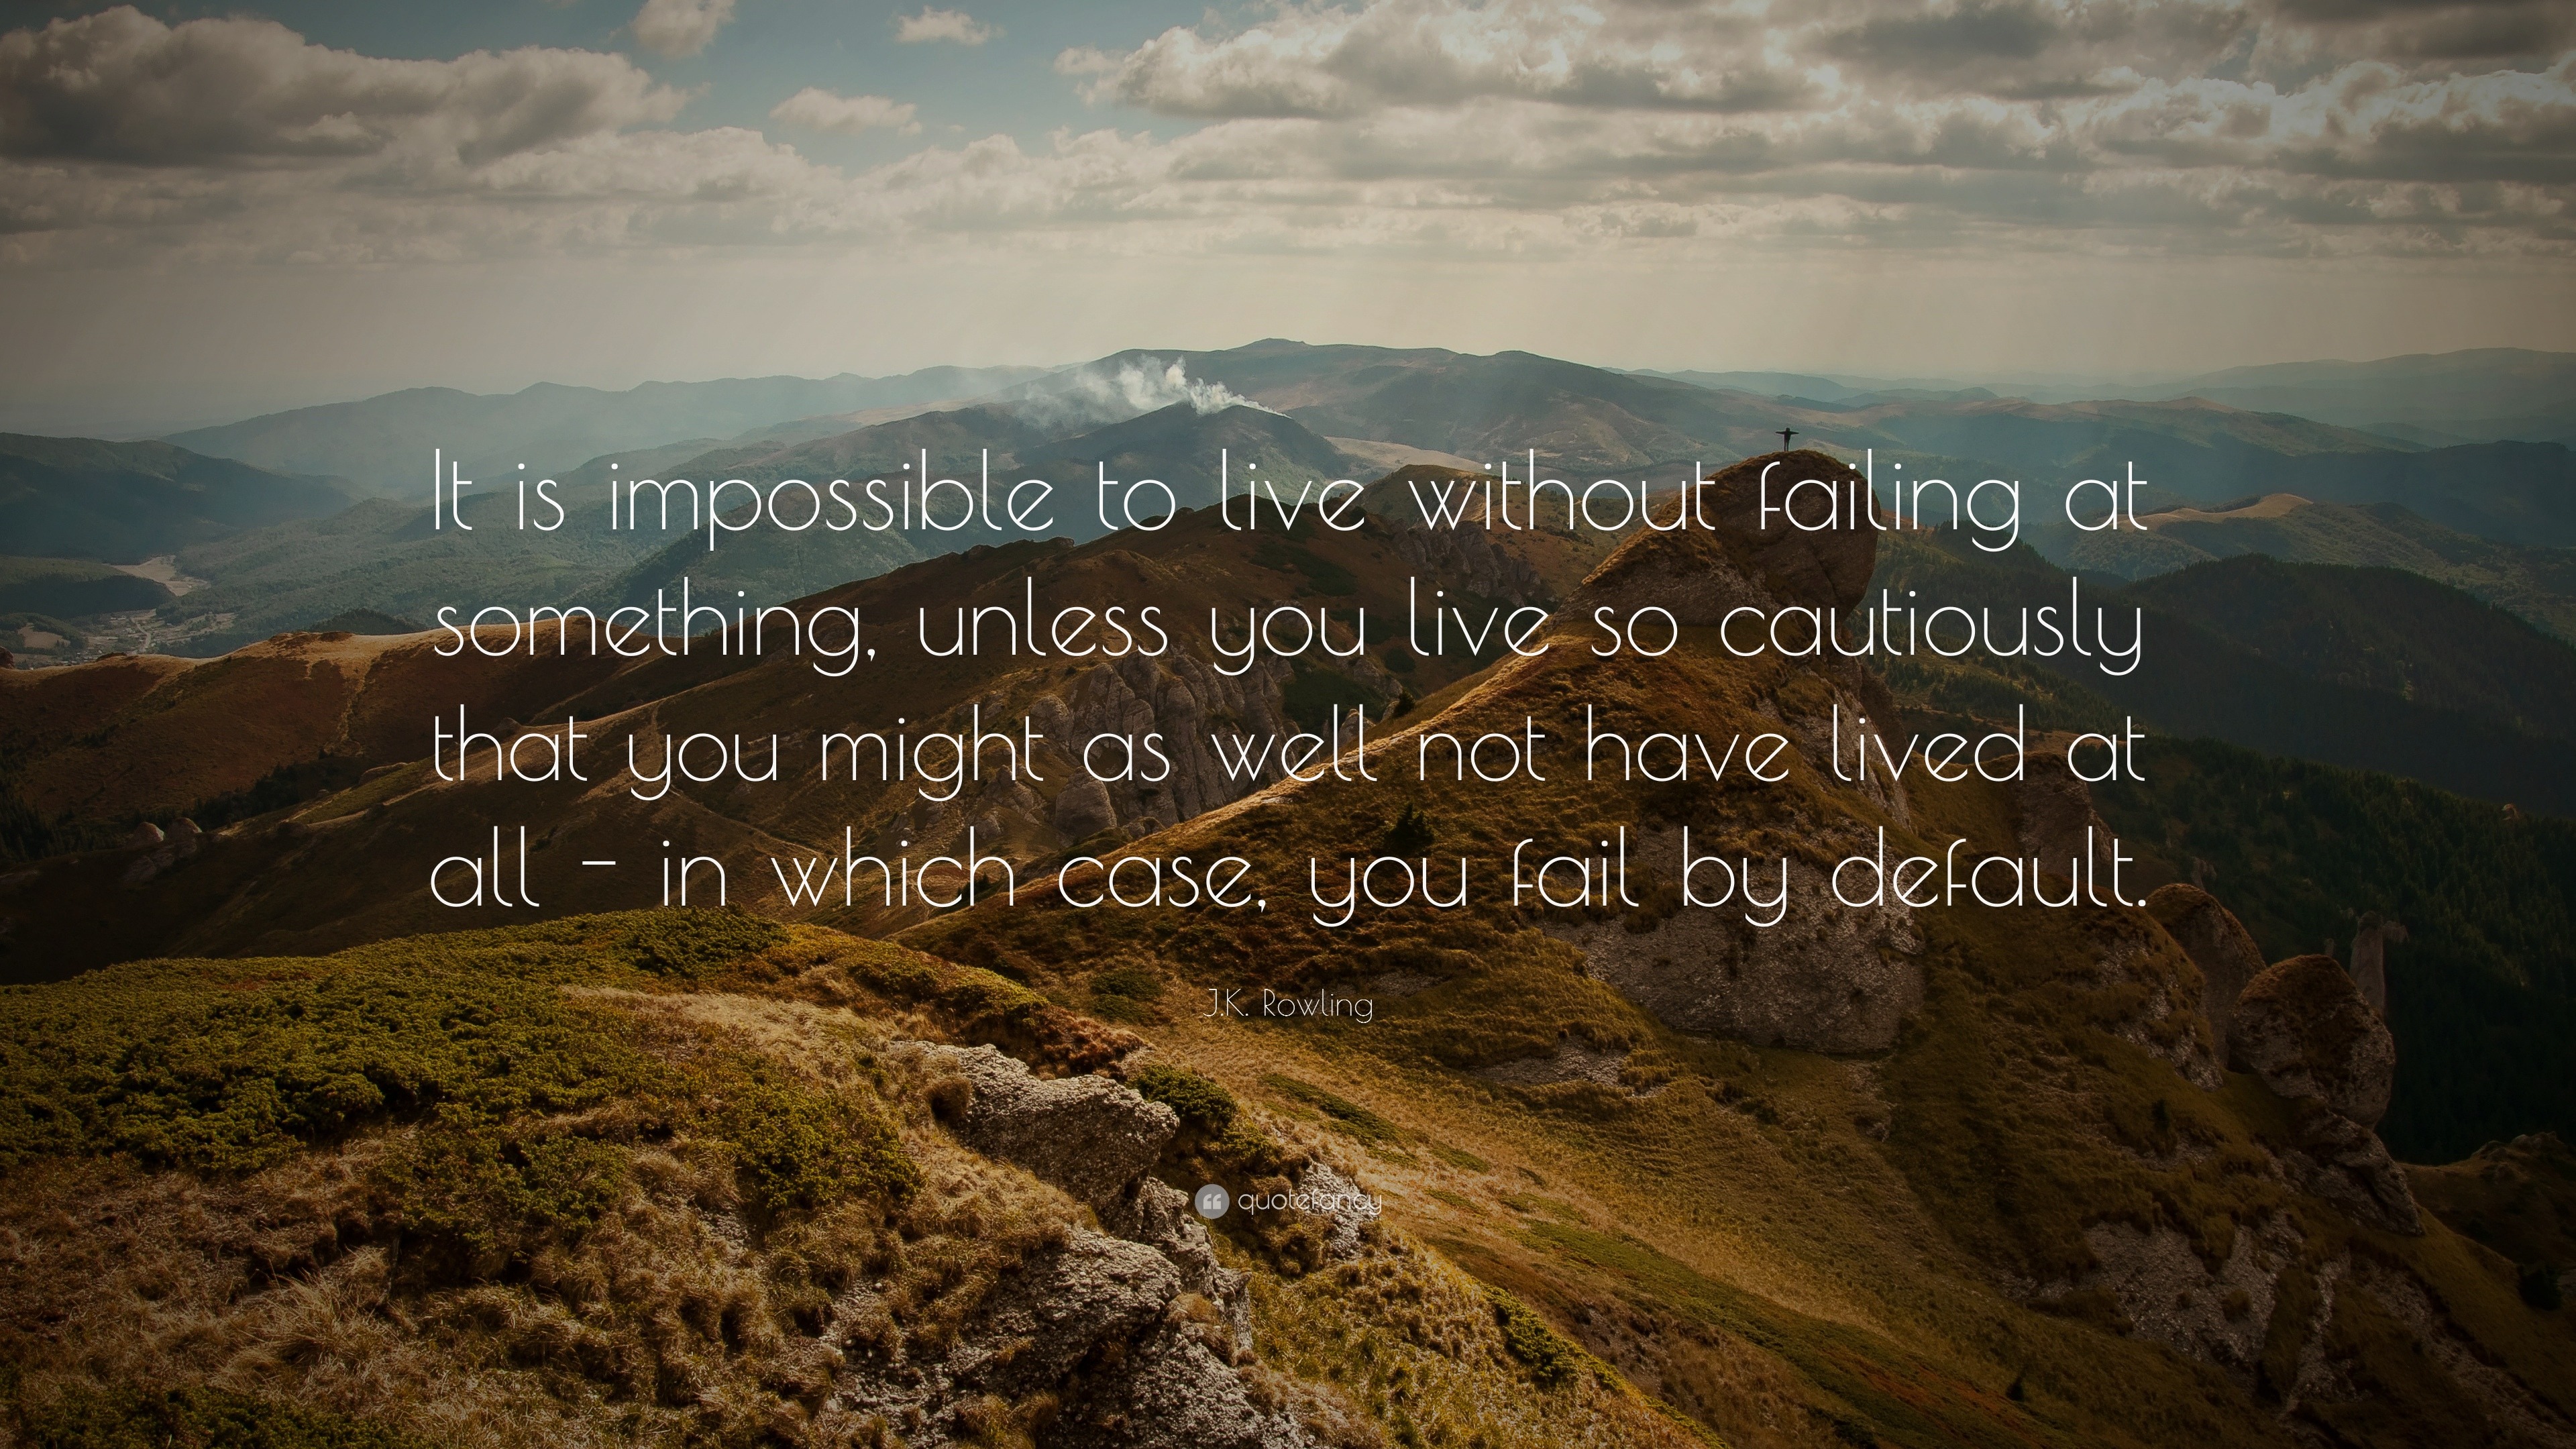 J.K. Rowling Quote: “It is impossible to live without failing at ...